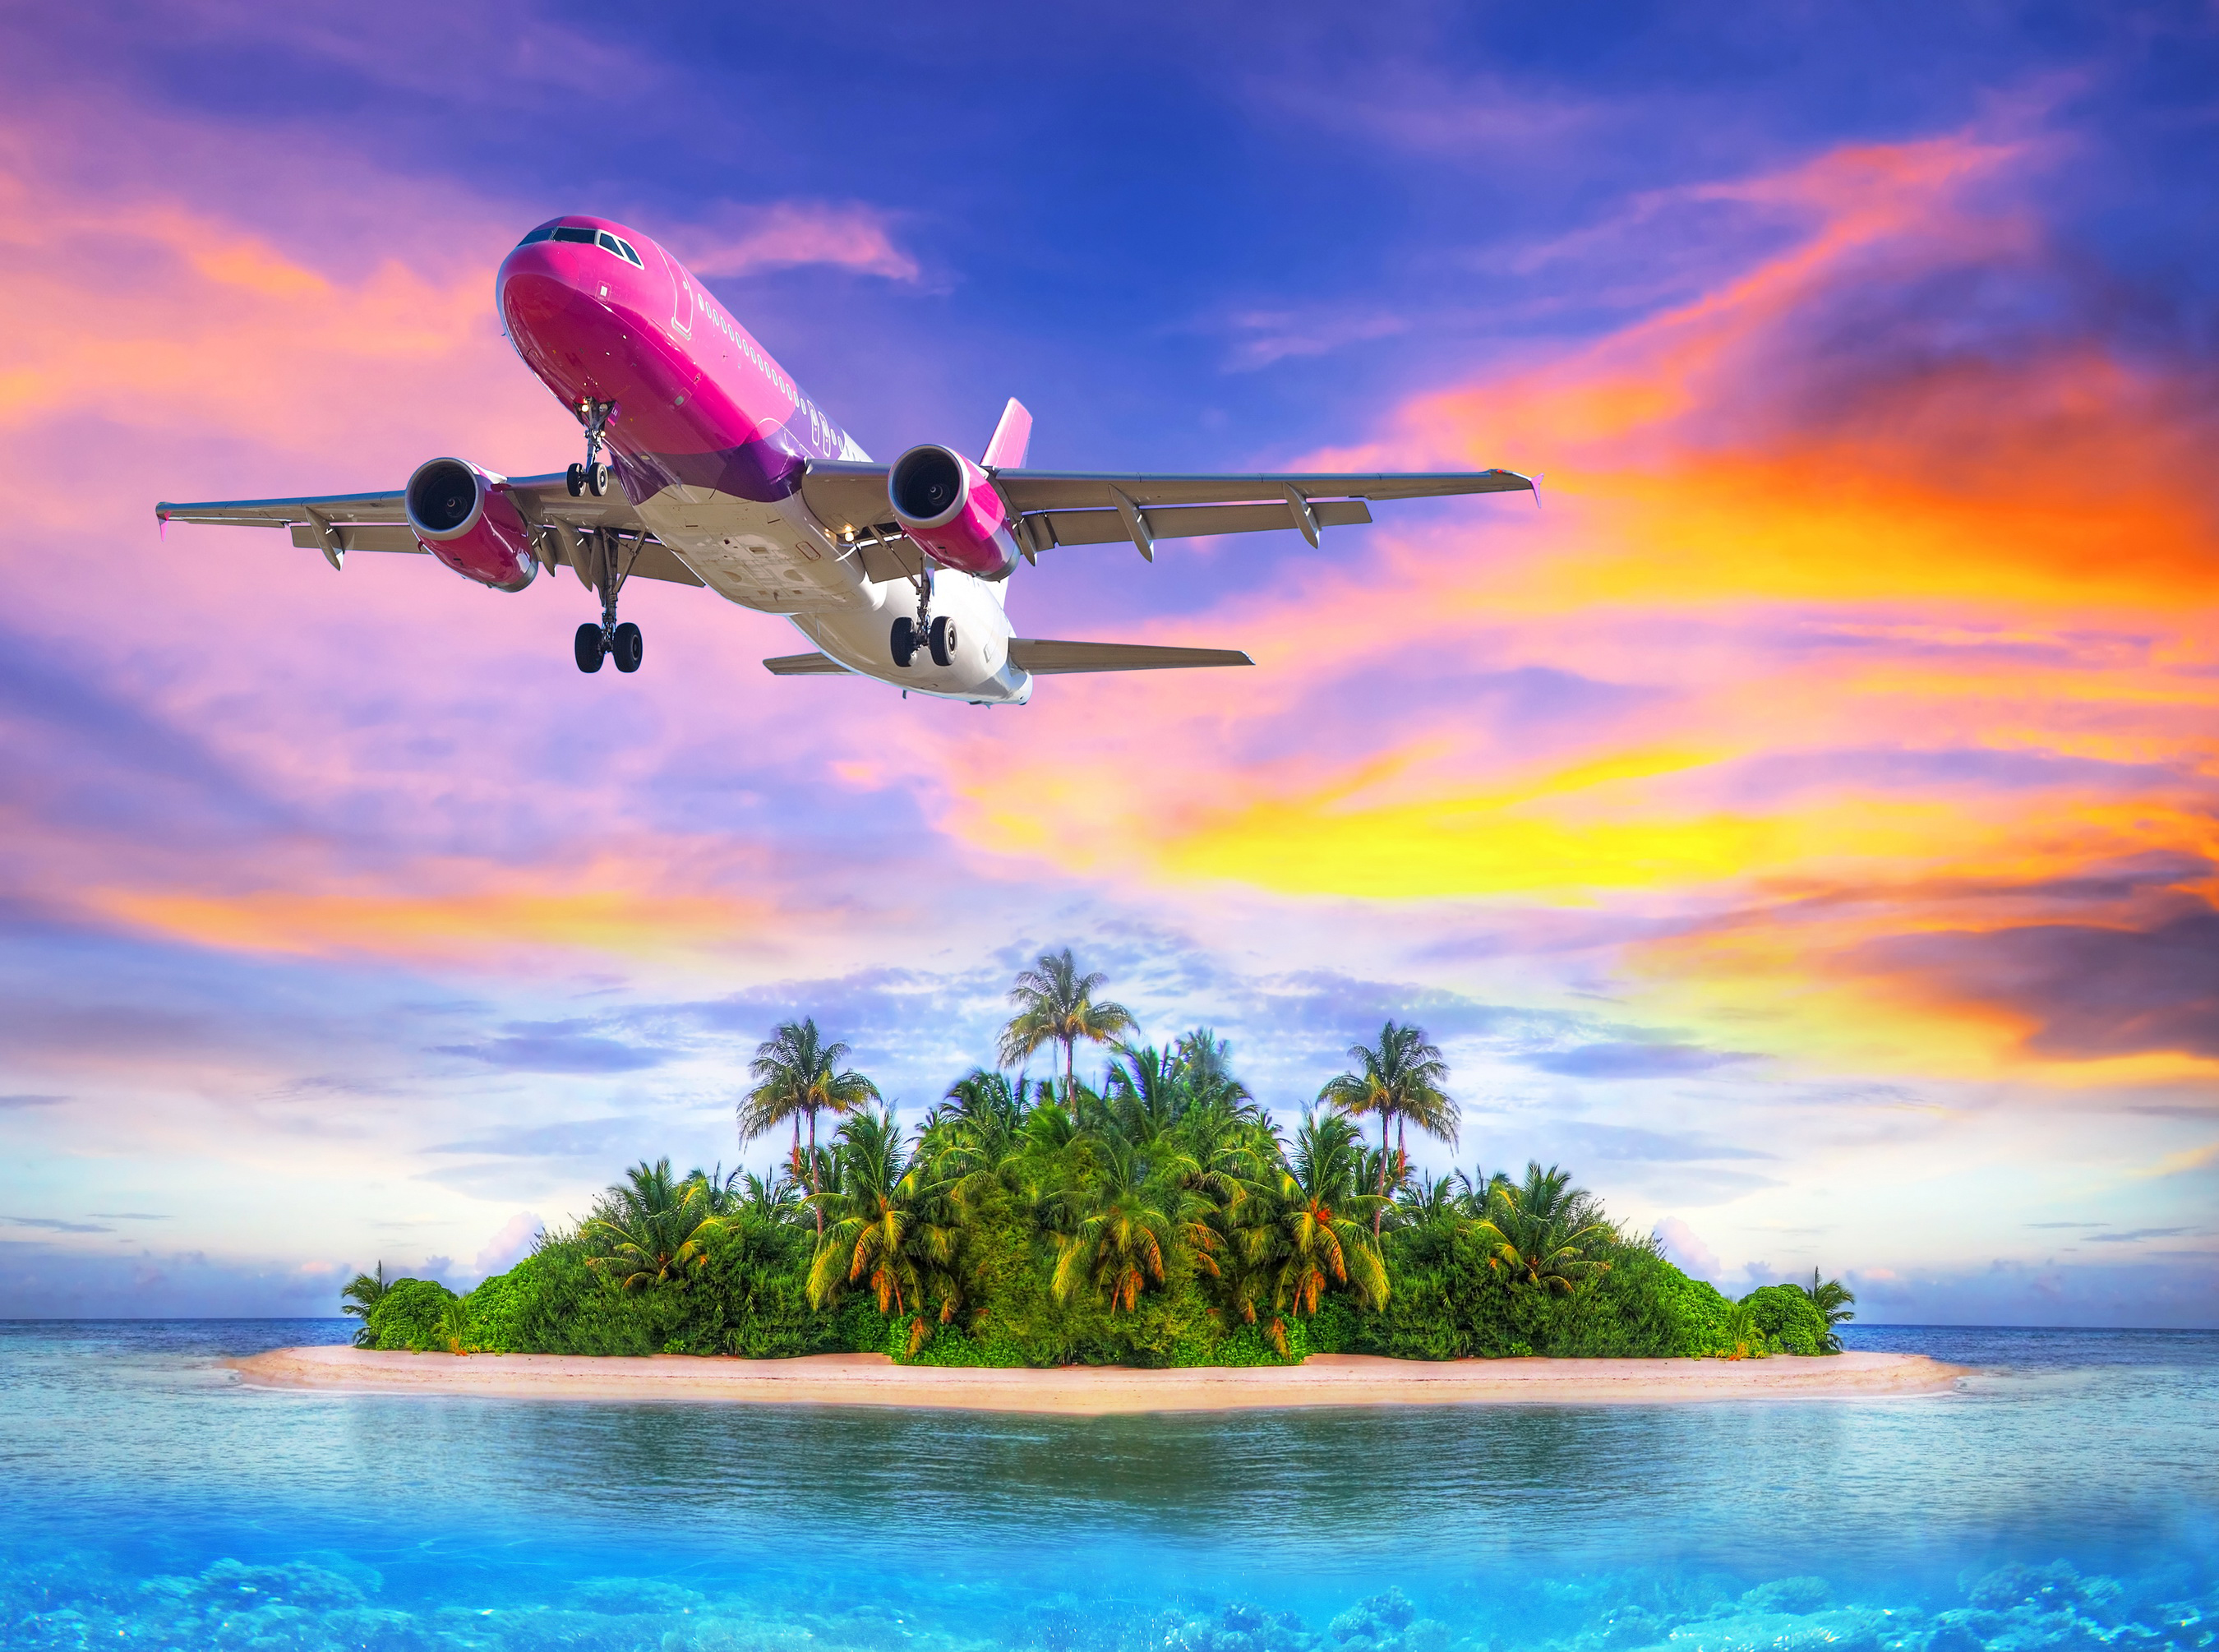 island, airbus a320, palm tree, ocean, vehicles, airplane, orange (color), sky, sunset, tropical, aircraft